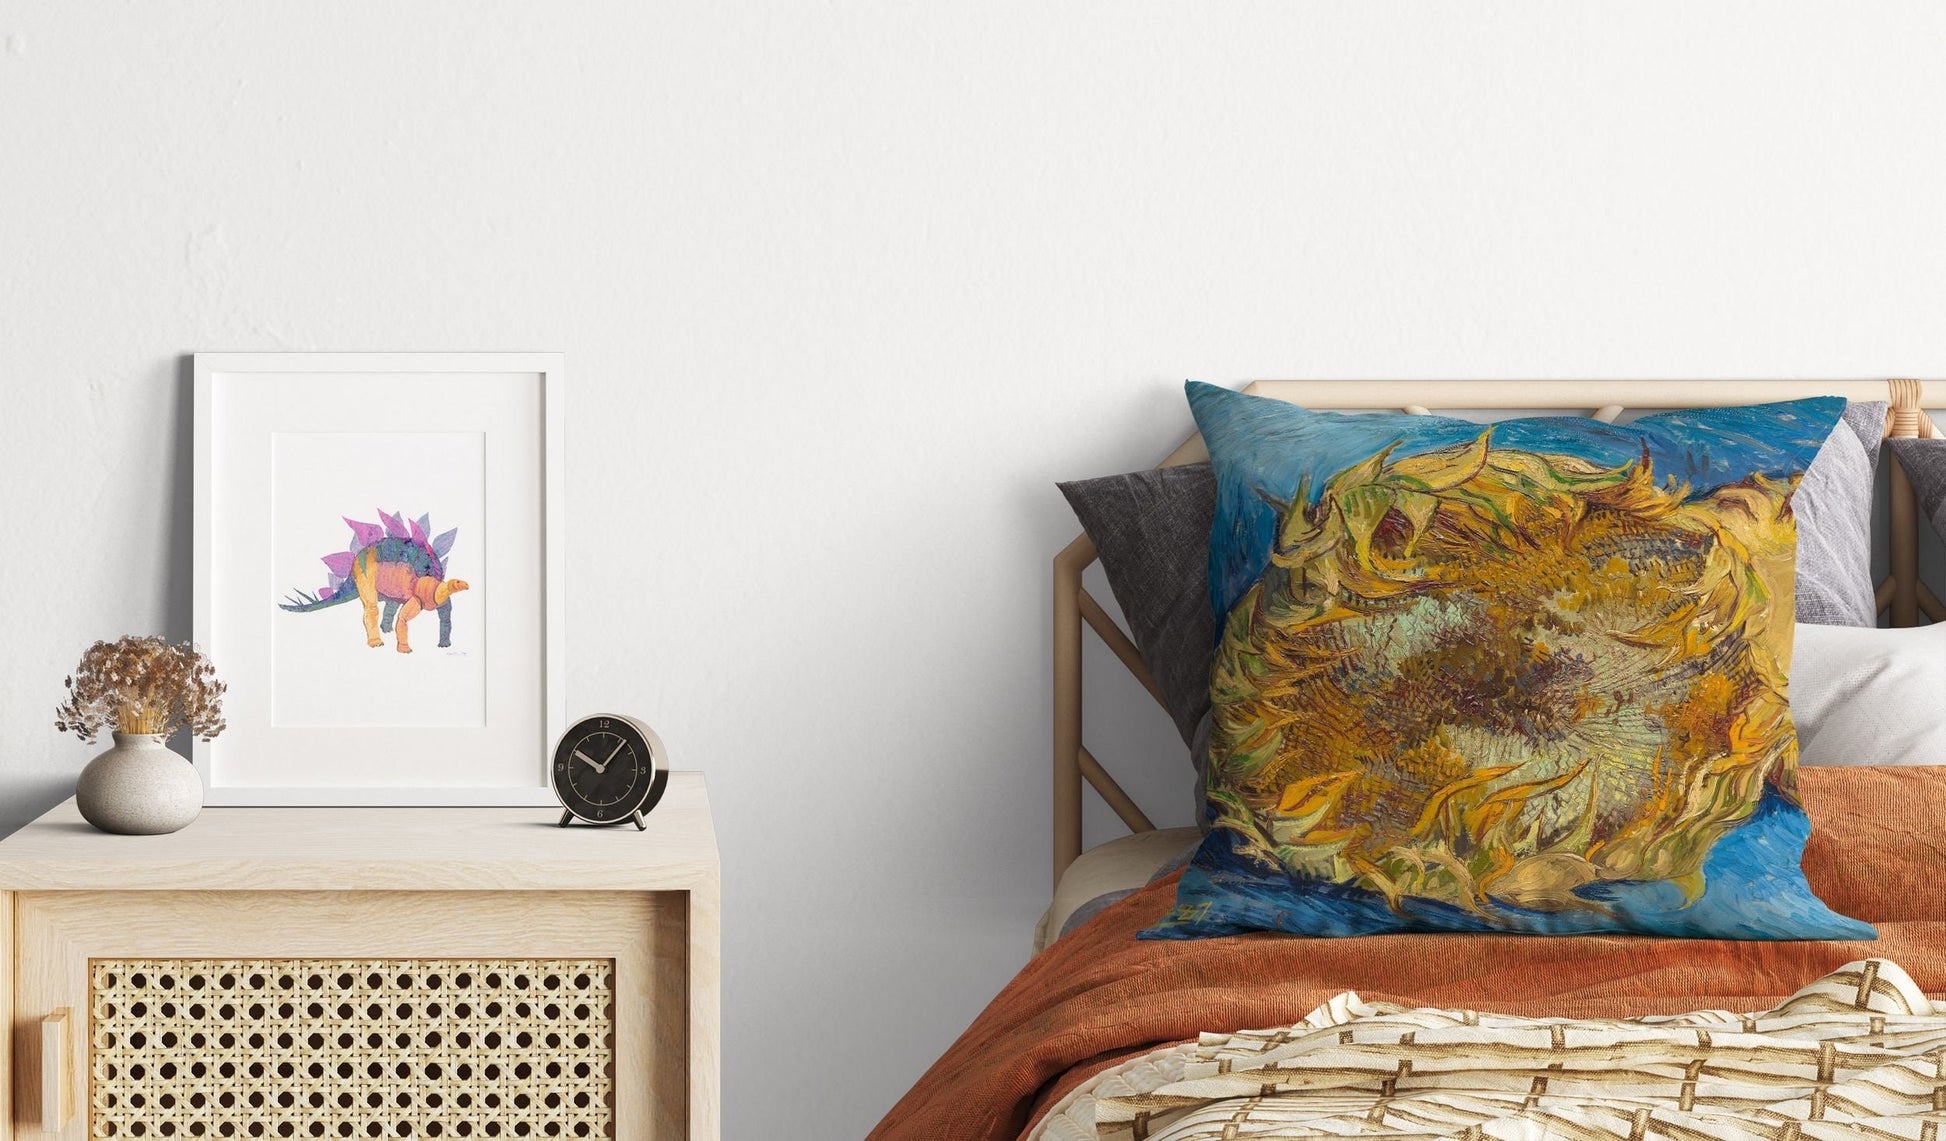 Vincent Van Gogh Sunflowers Famous Painting Throw Pillow Cover, Soft Pillow Cases, Bright Yellow Pillow, Farmhouse Pillow